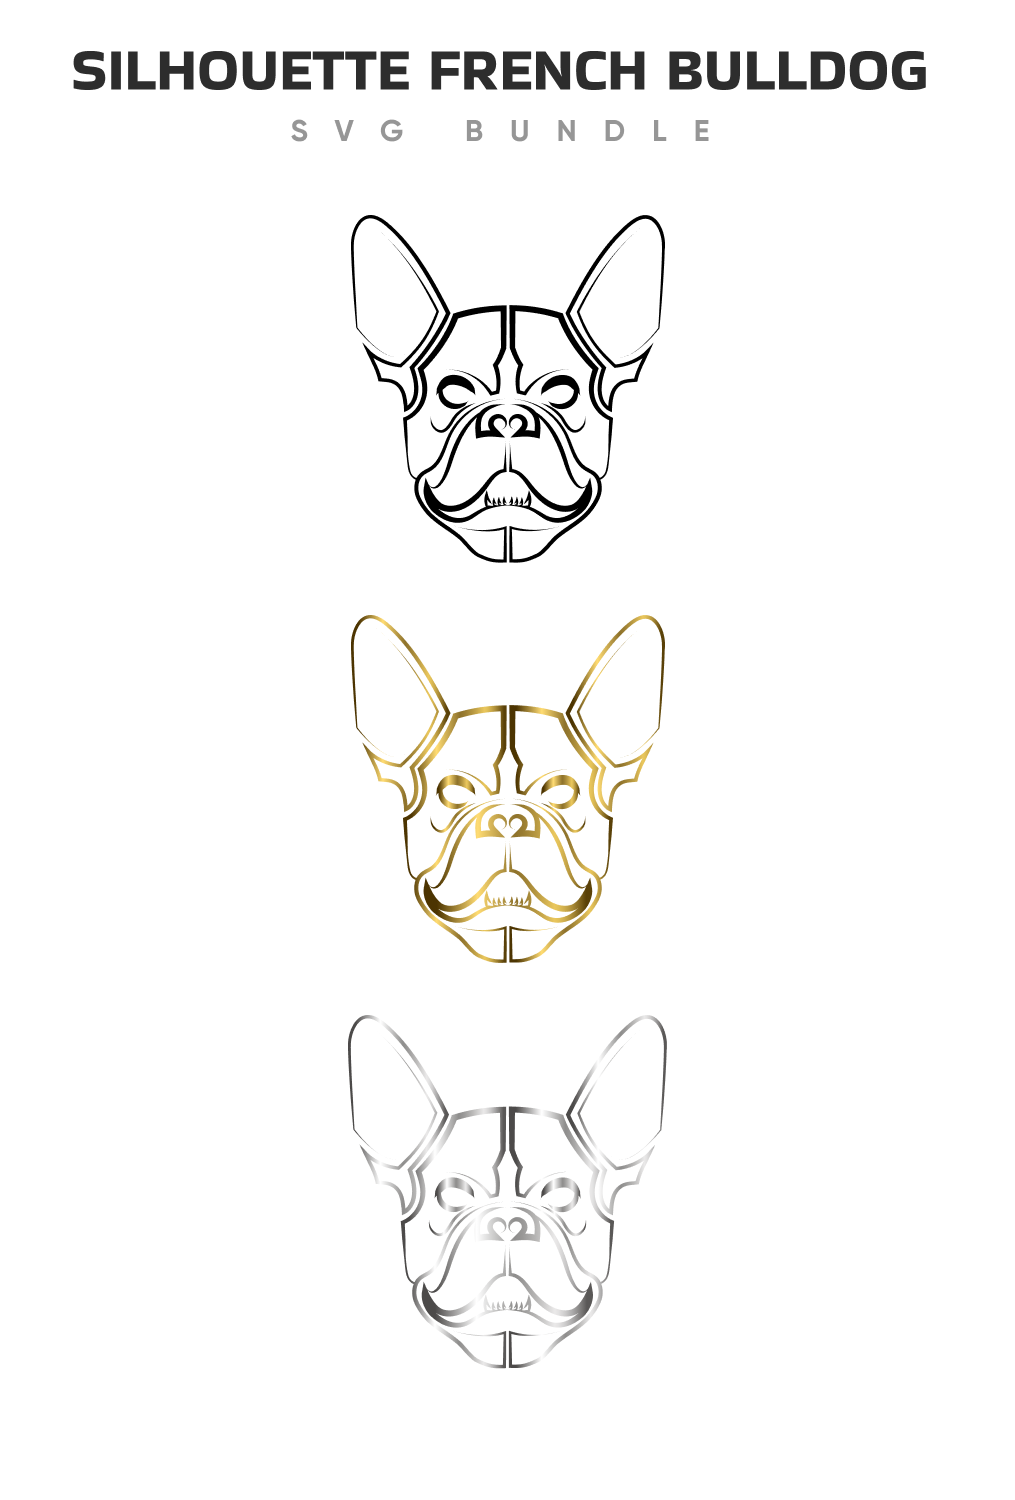 Dog's head is shown in three different colors.